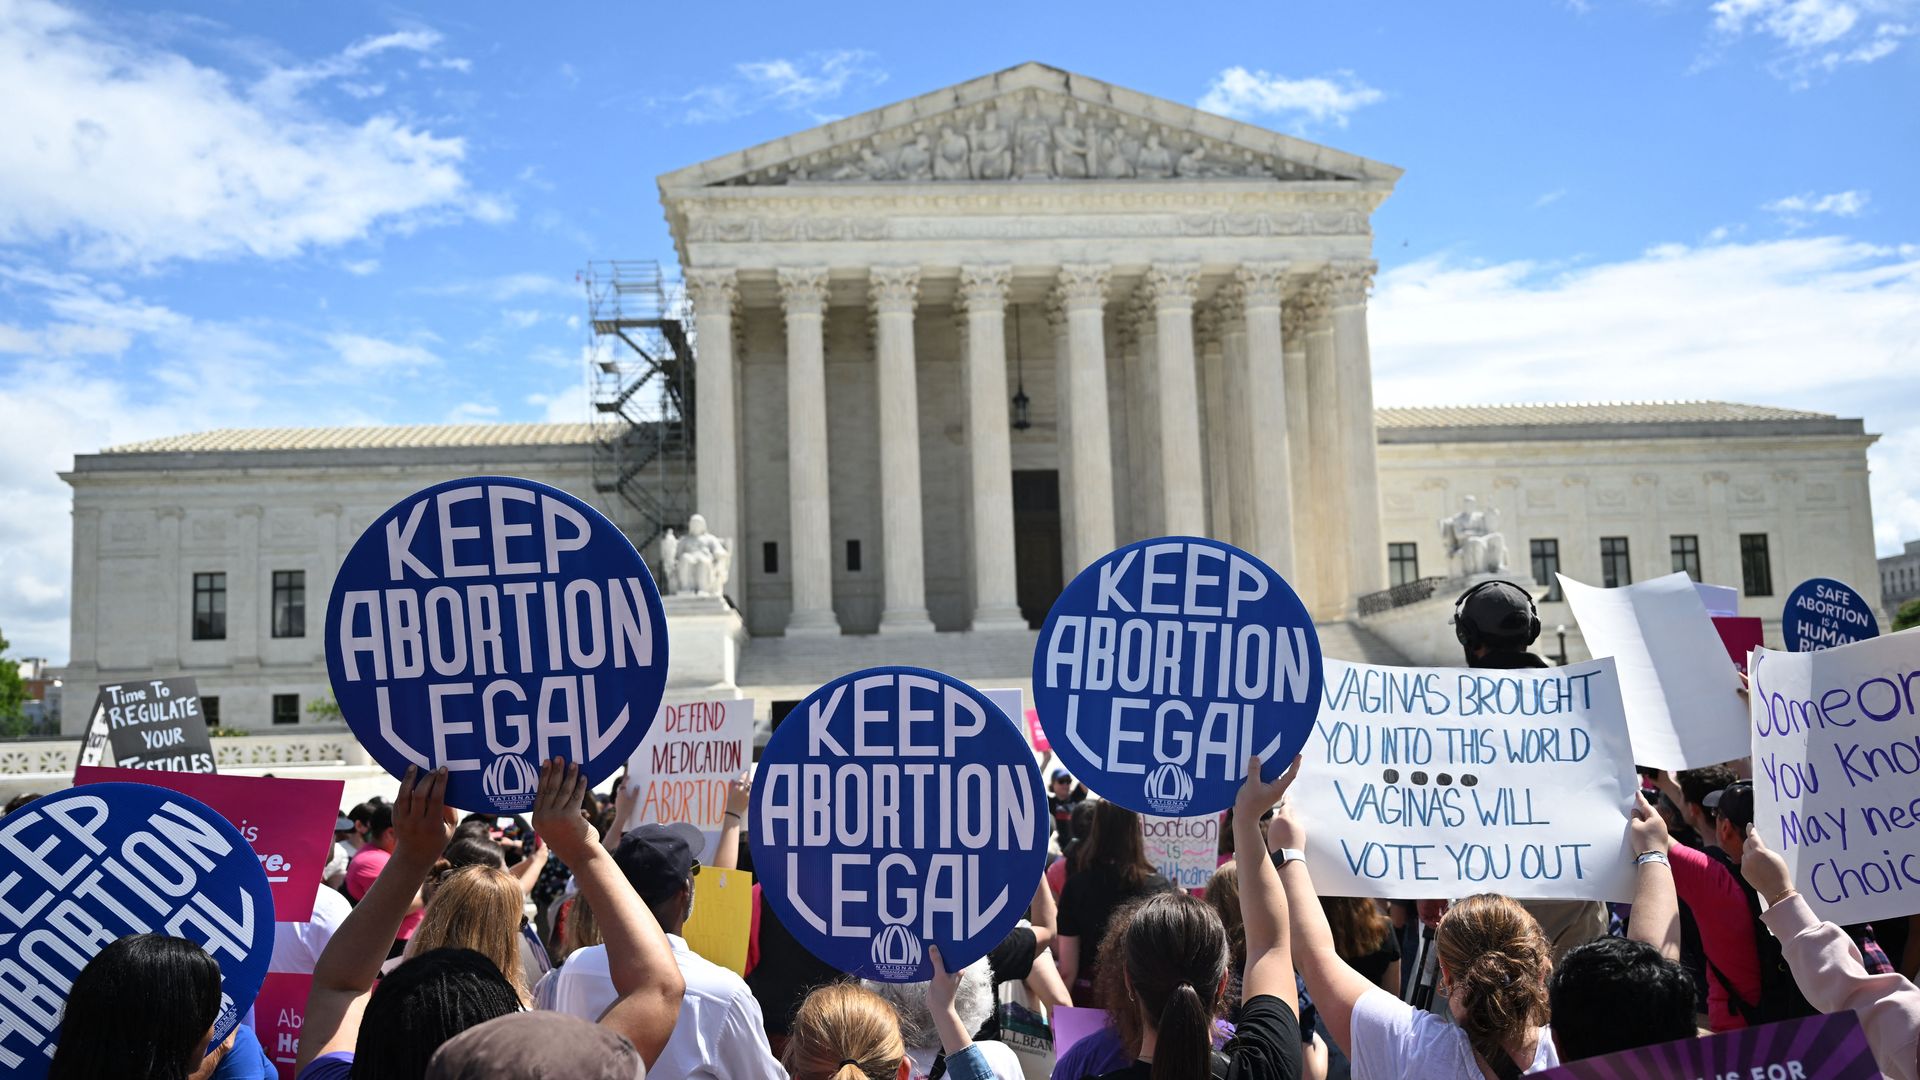 Picture of an abortion rights protest happening in front of the Supreme Court building. Protesters have signs that say "keep abortion legal."